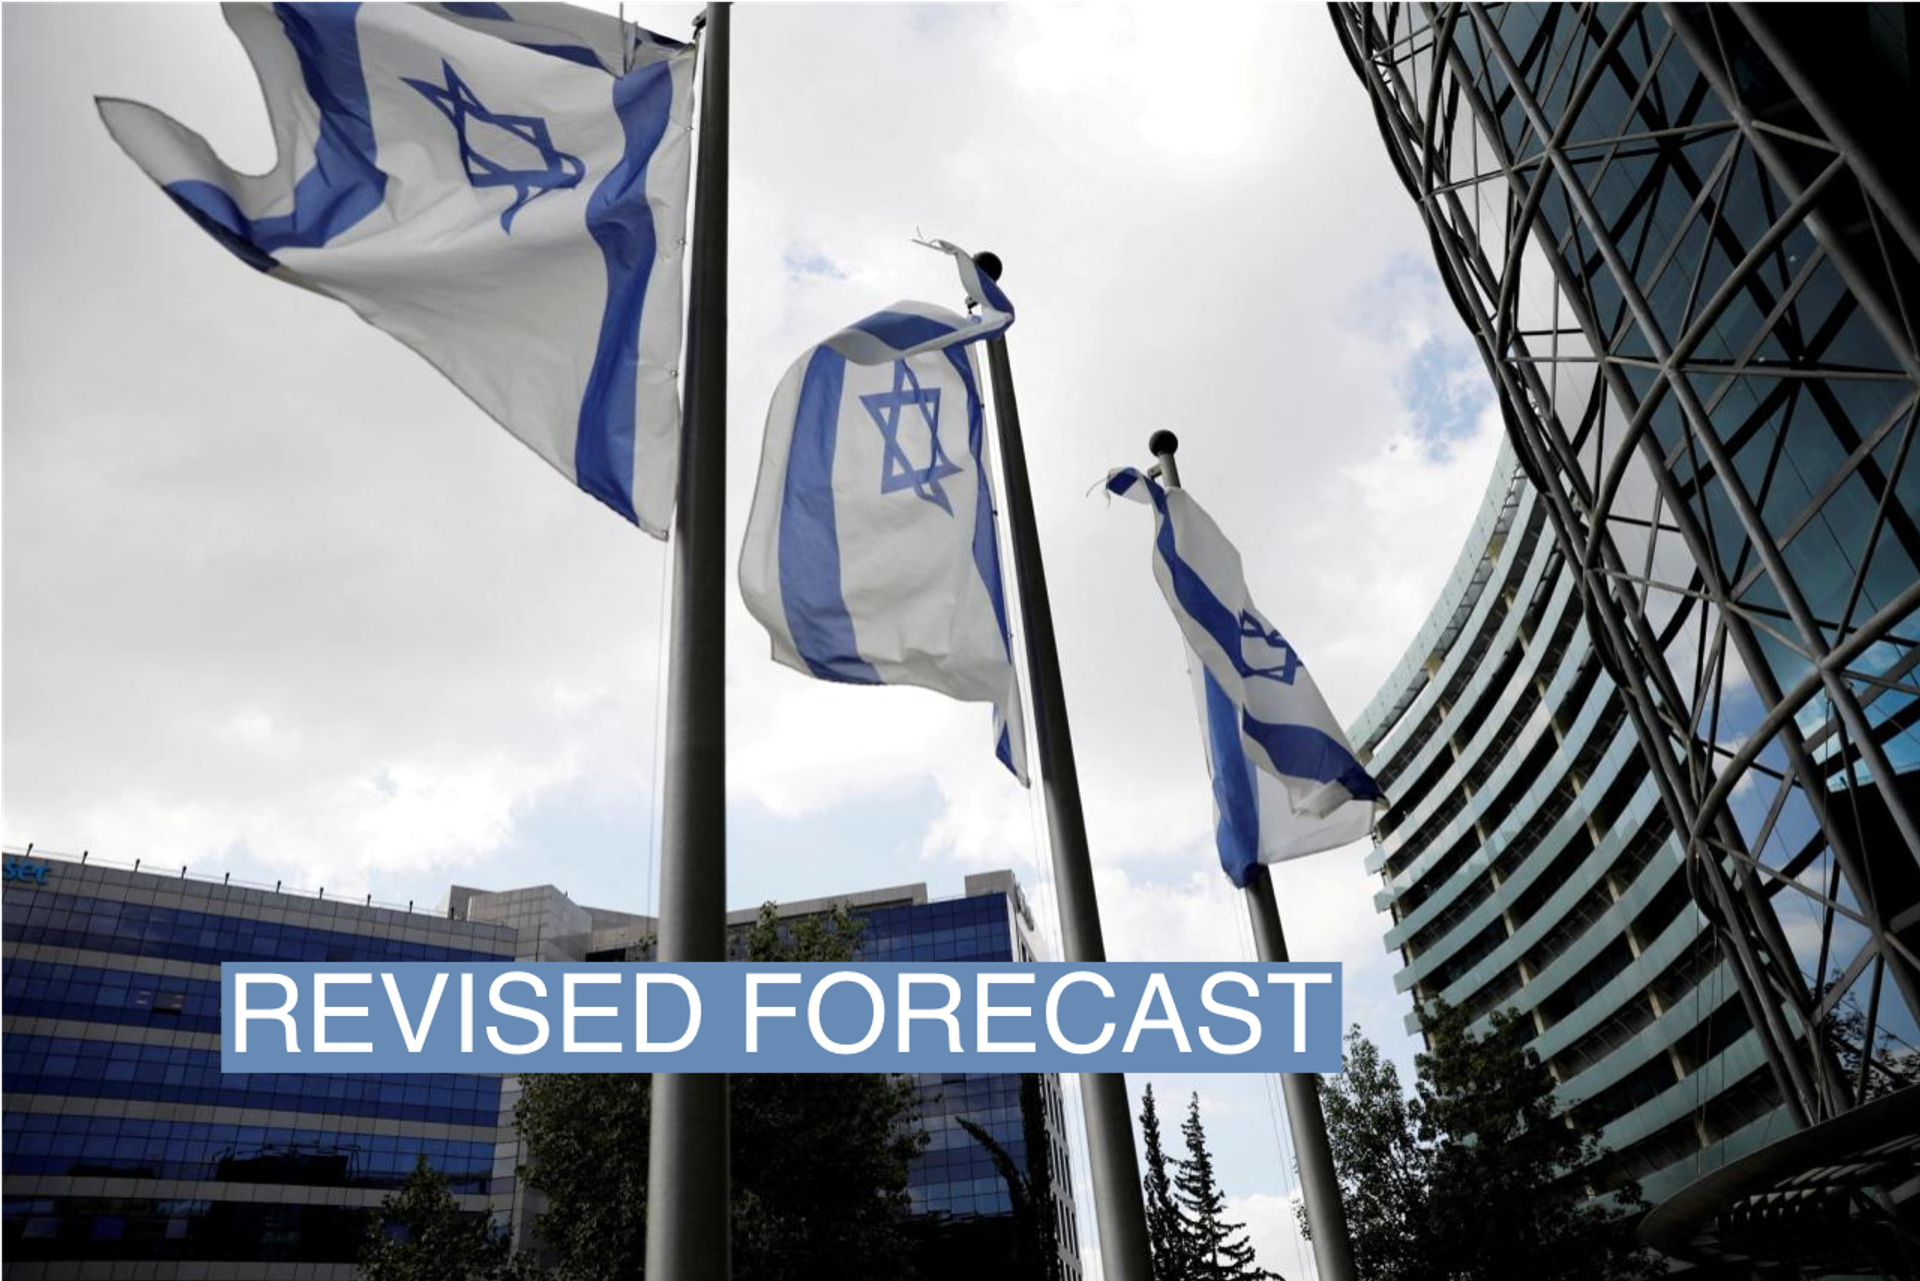 Israeli national flags flutter near office towers at a business park also housing high tech companies, at Ofer Park in Petah Tikva, Israel August 27, 2020. REUTERS/Ronen Zvulun/File Photo